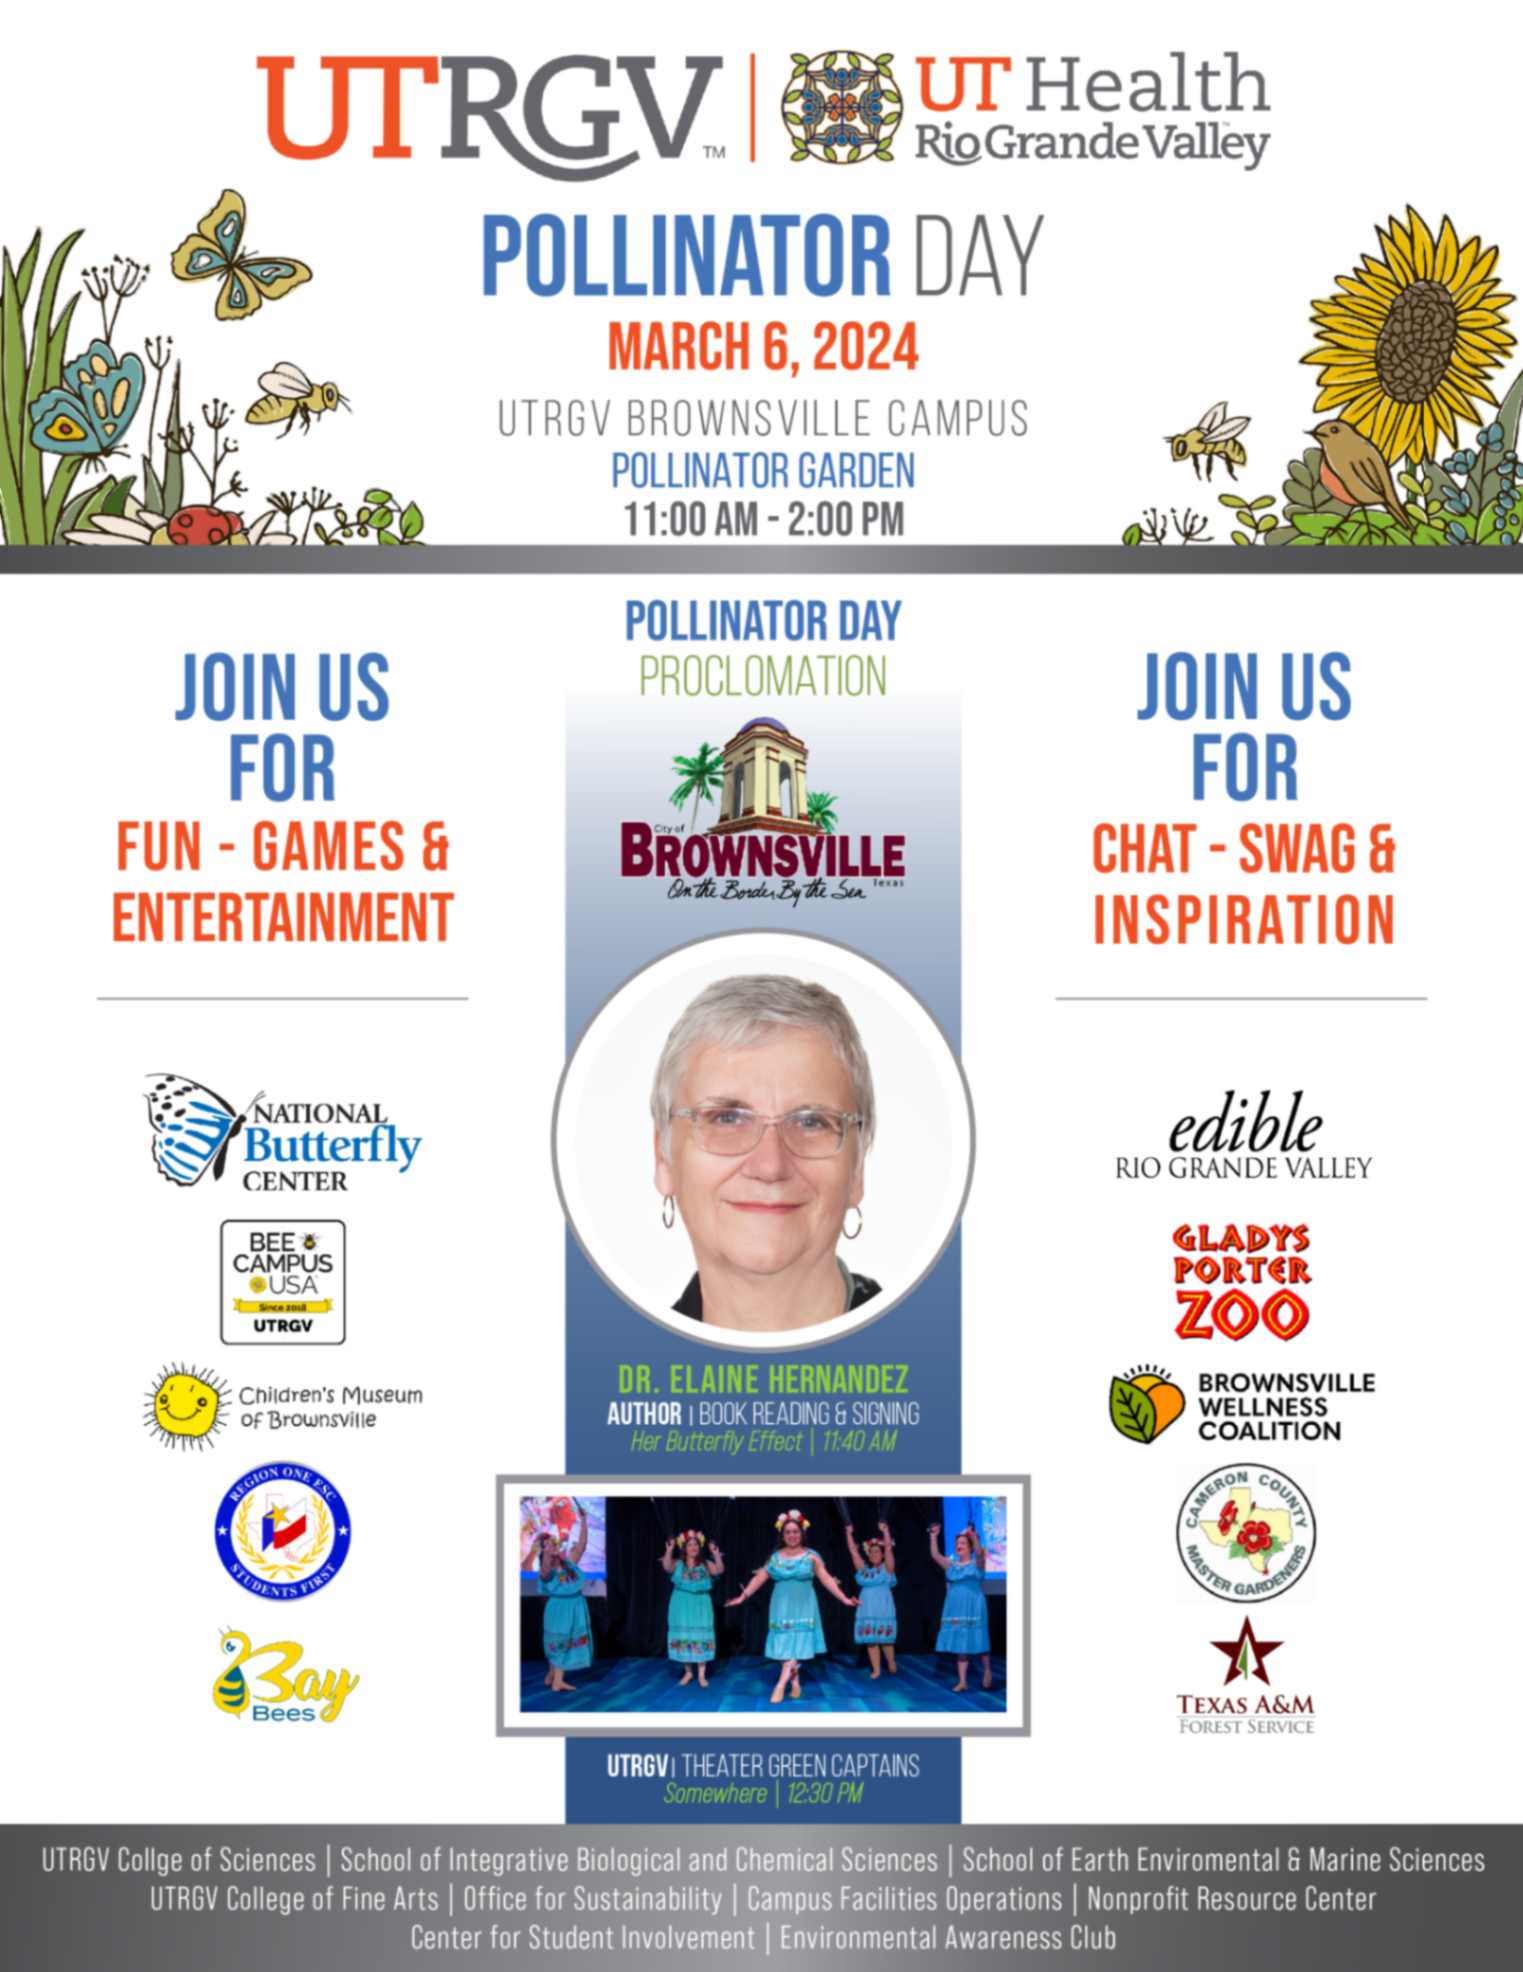 Pollinator Day March 6, 2024 UTRGV Brownsville Campus Pollinator Garden 11:00 am - 2:00pm. Join us for fun - games, entertainment, chat, swag and inspiration